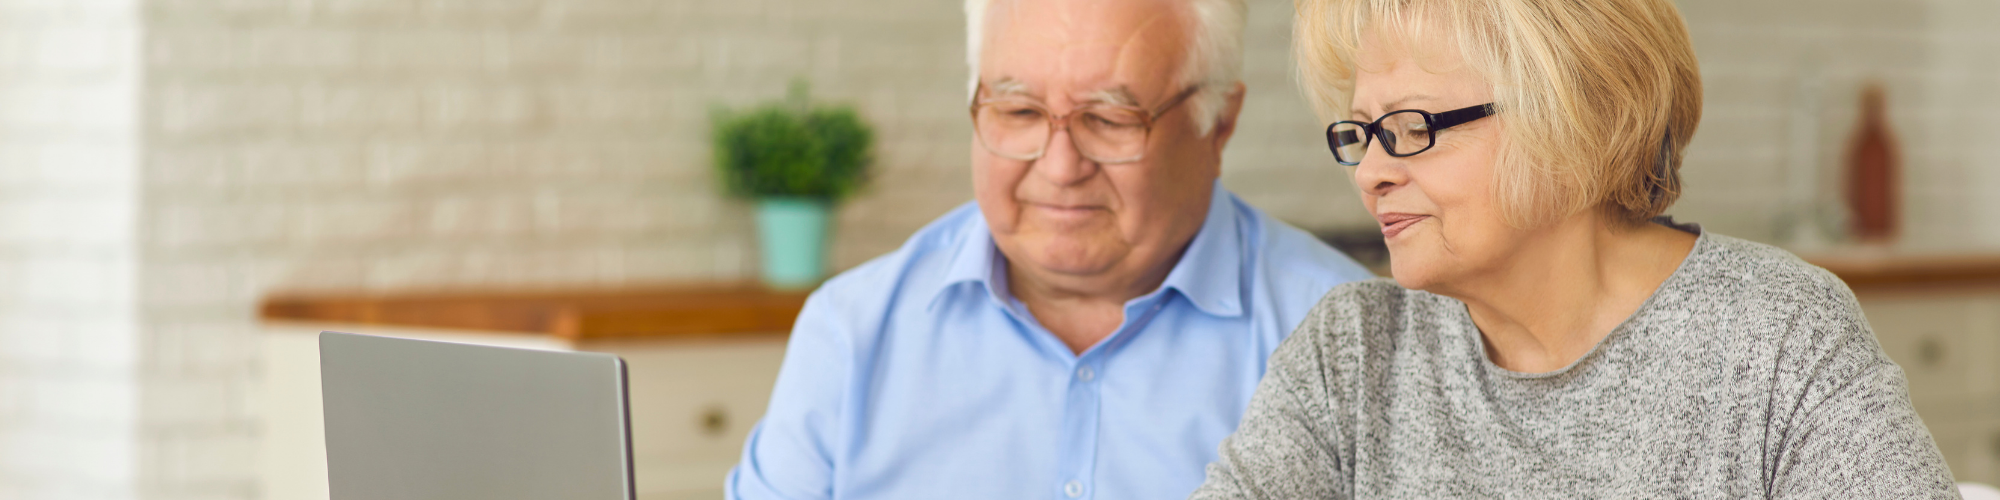 Older couple in kitchen looking at computer